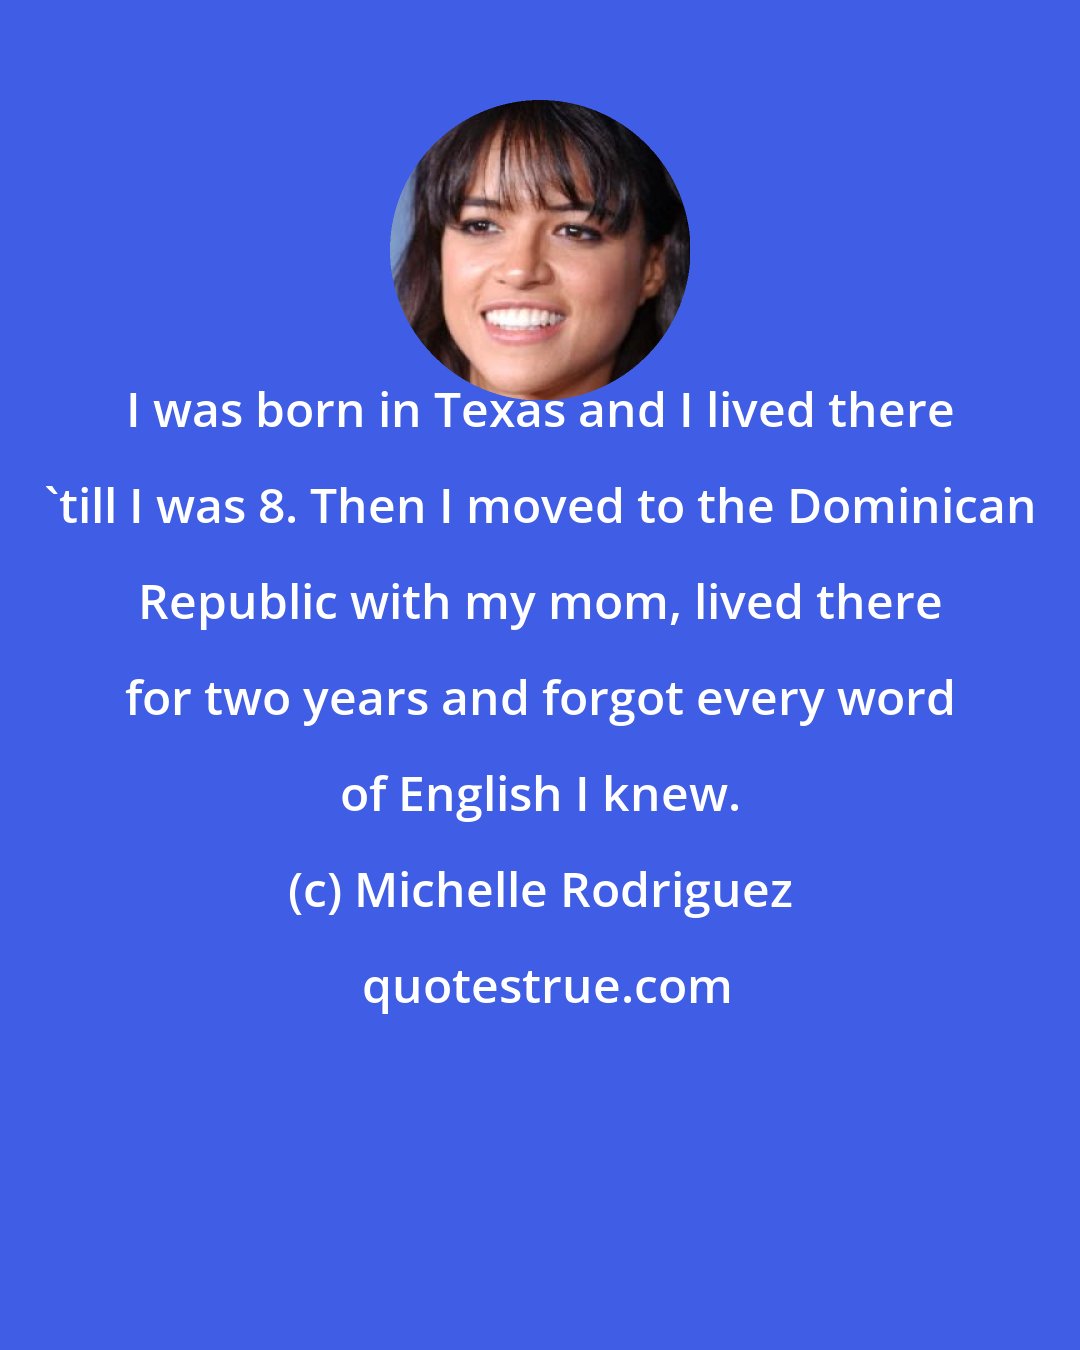 Michelle Rodriguez: I was born in Texas and I lived there 'till I was 8. Then I moved to the Dominican Republic with my mom, lived there for two years and forgot every word of English I knew.